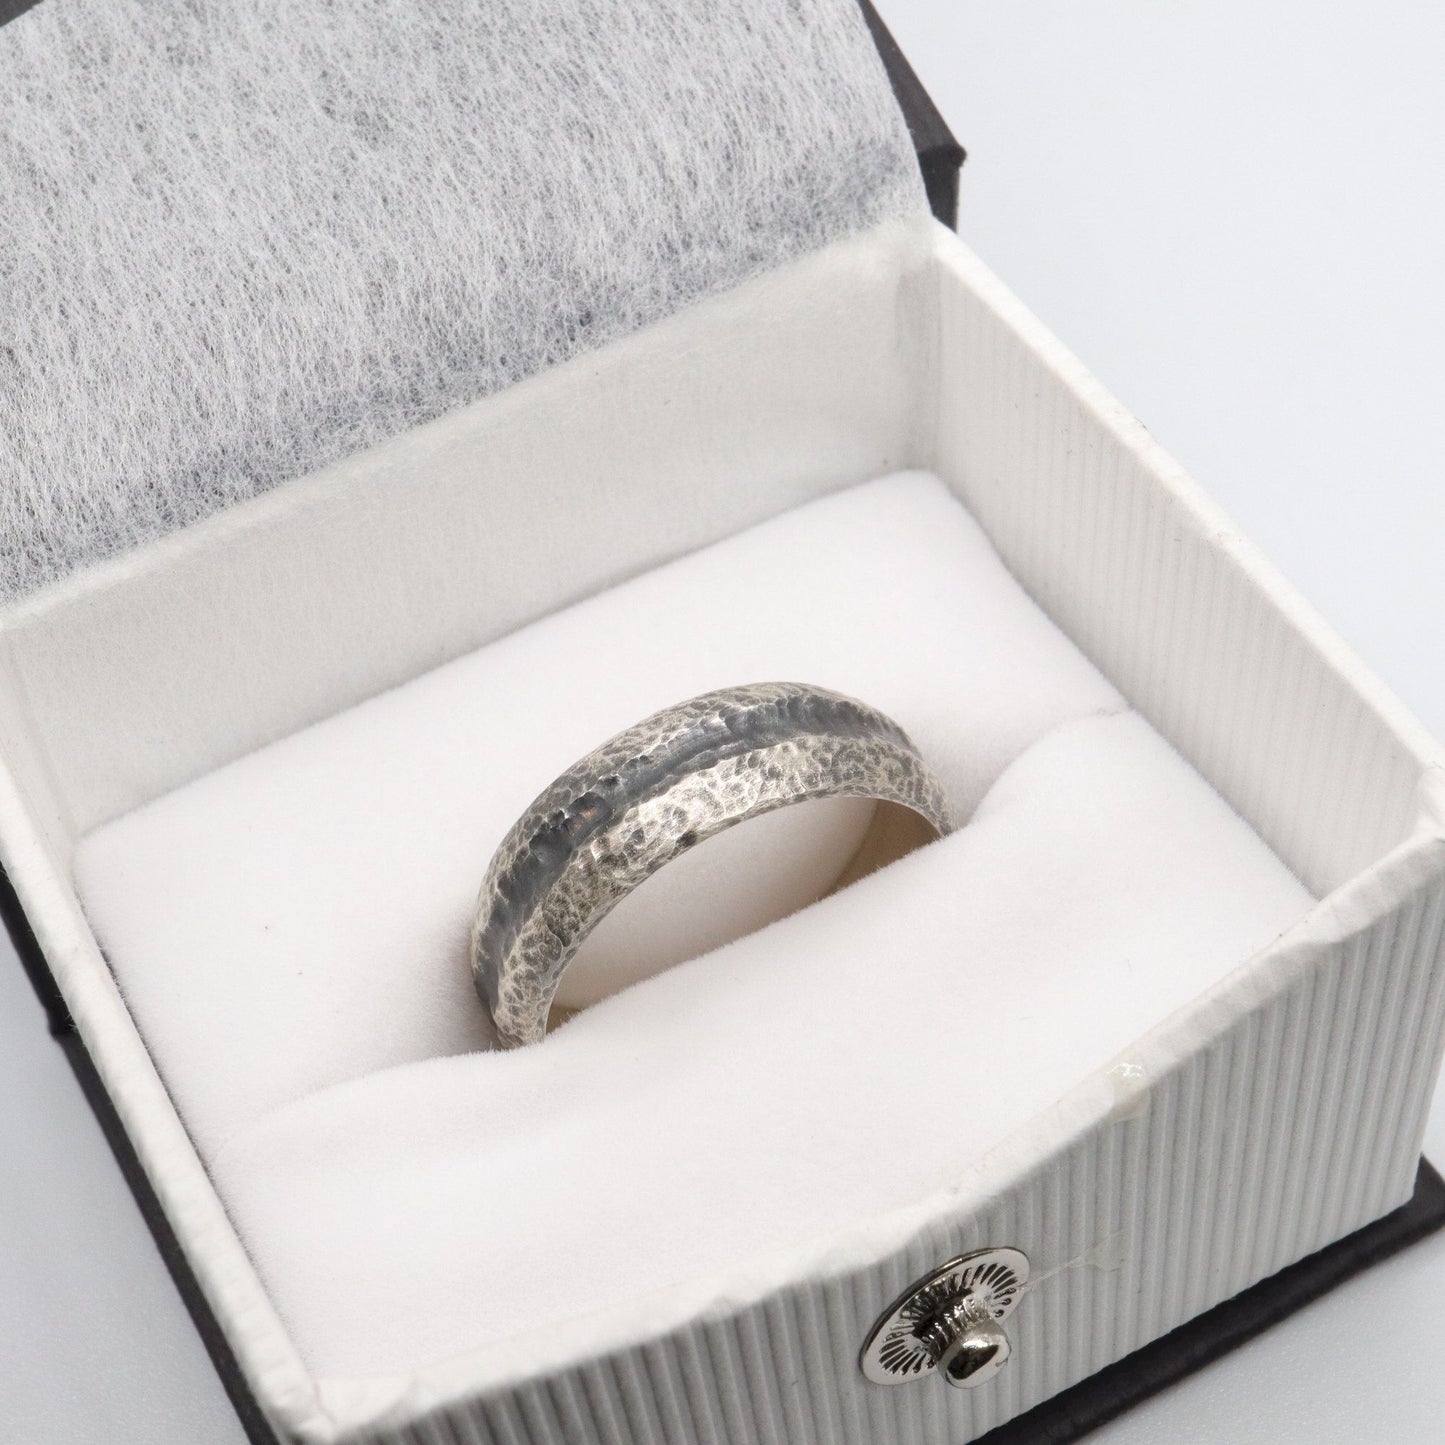 Black silver mans promise, engagement  or wedding ring with a carved rustic pattern, Fleetwith Pike design.